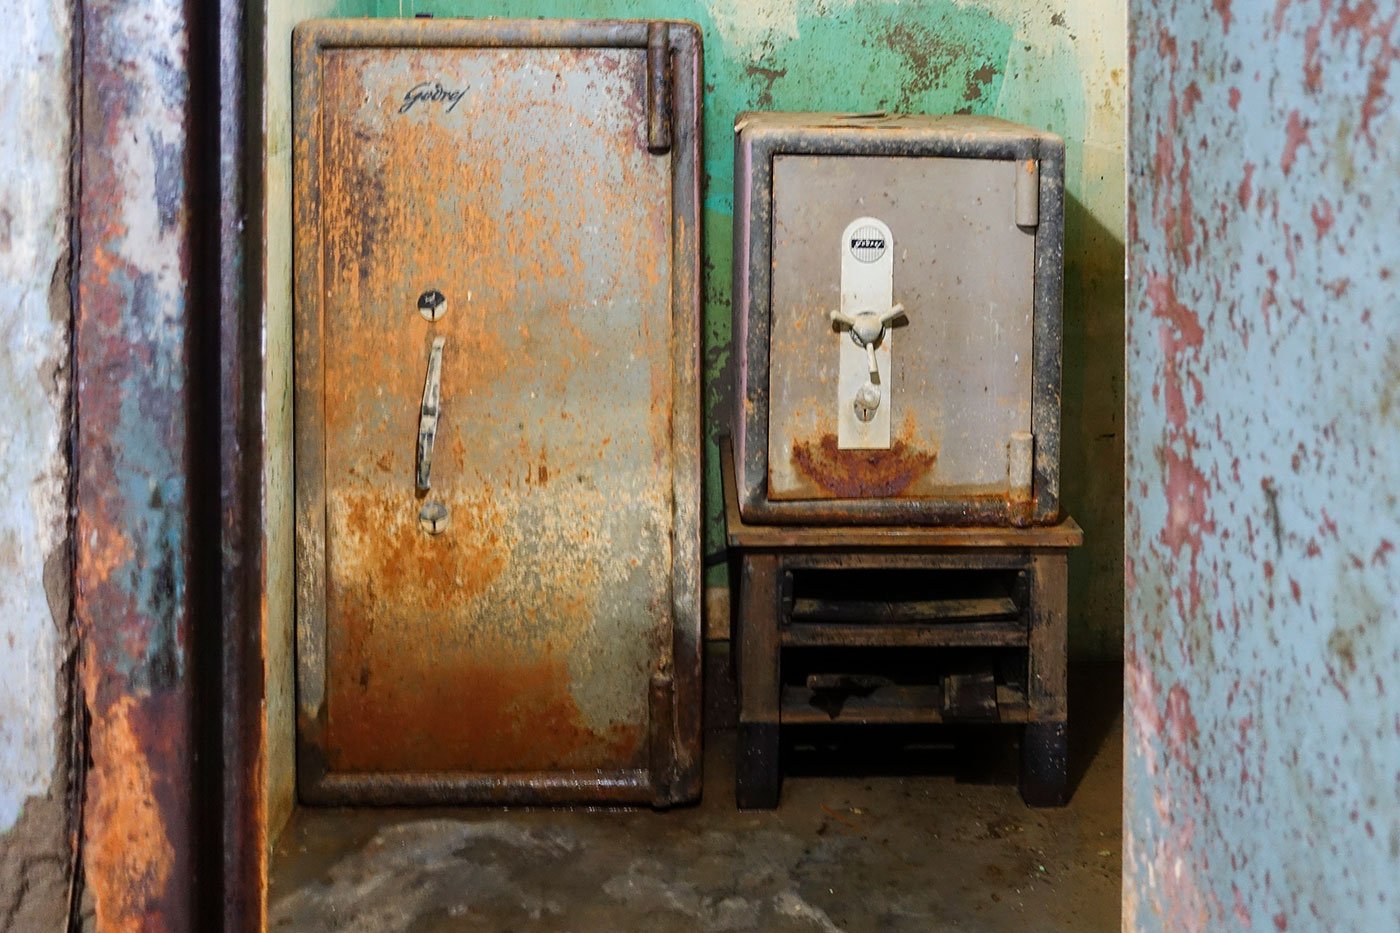 Two cast-iron safes bear the rust, corrosion and marks wrought by the waters that engulfed them.